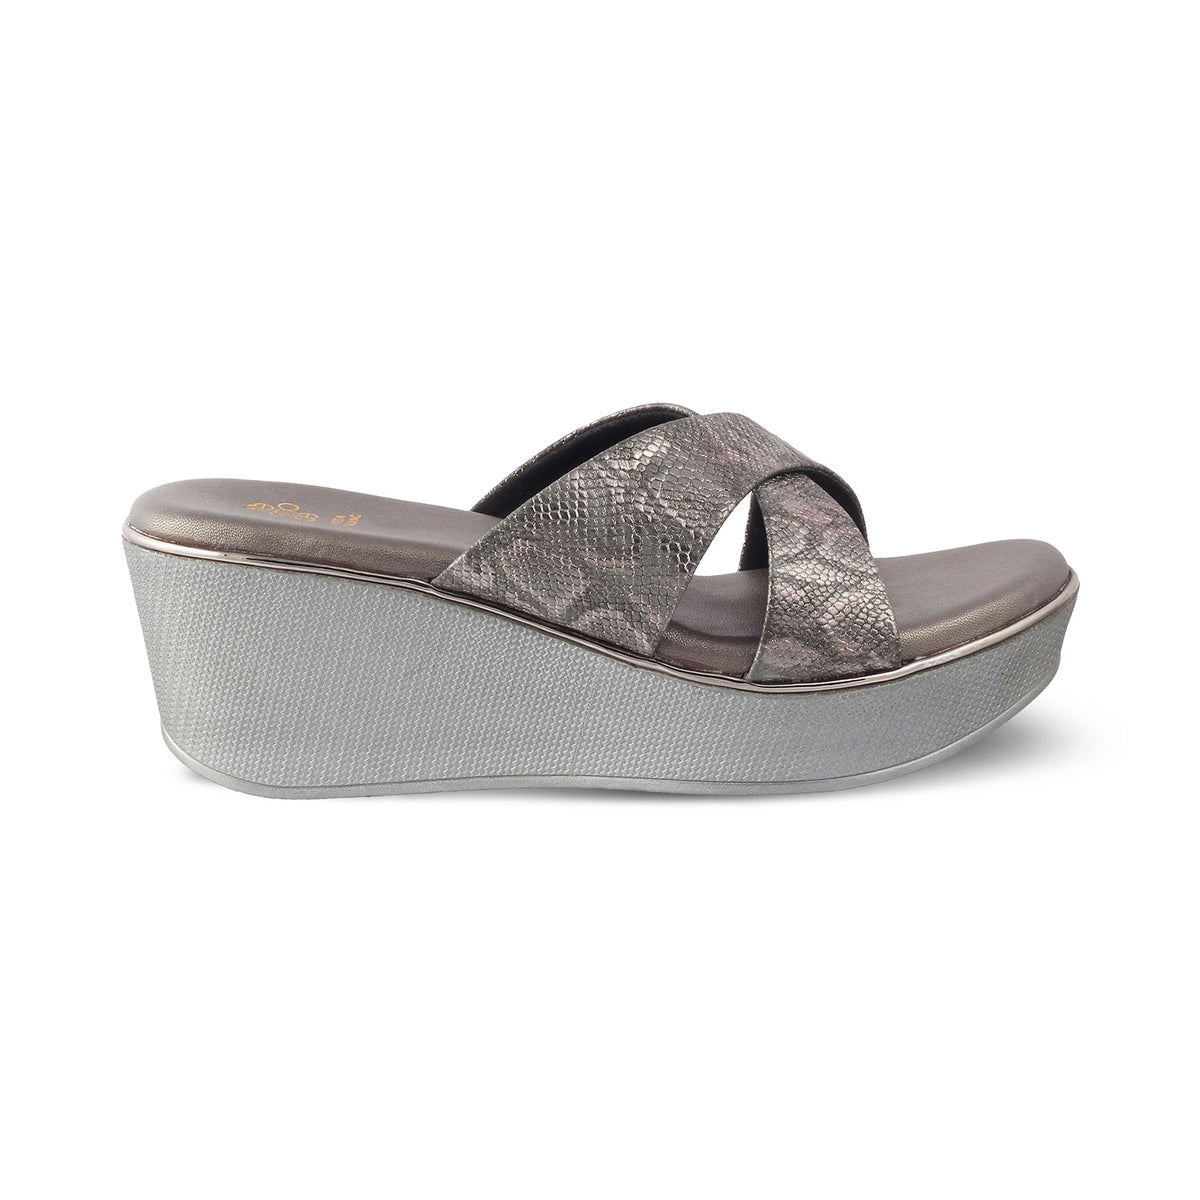 The Savvy Pewter Women's Dress Wedge Sandals Tresmode - Tresmode